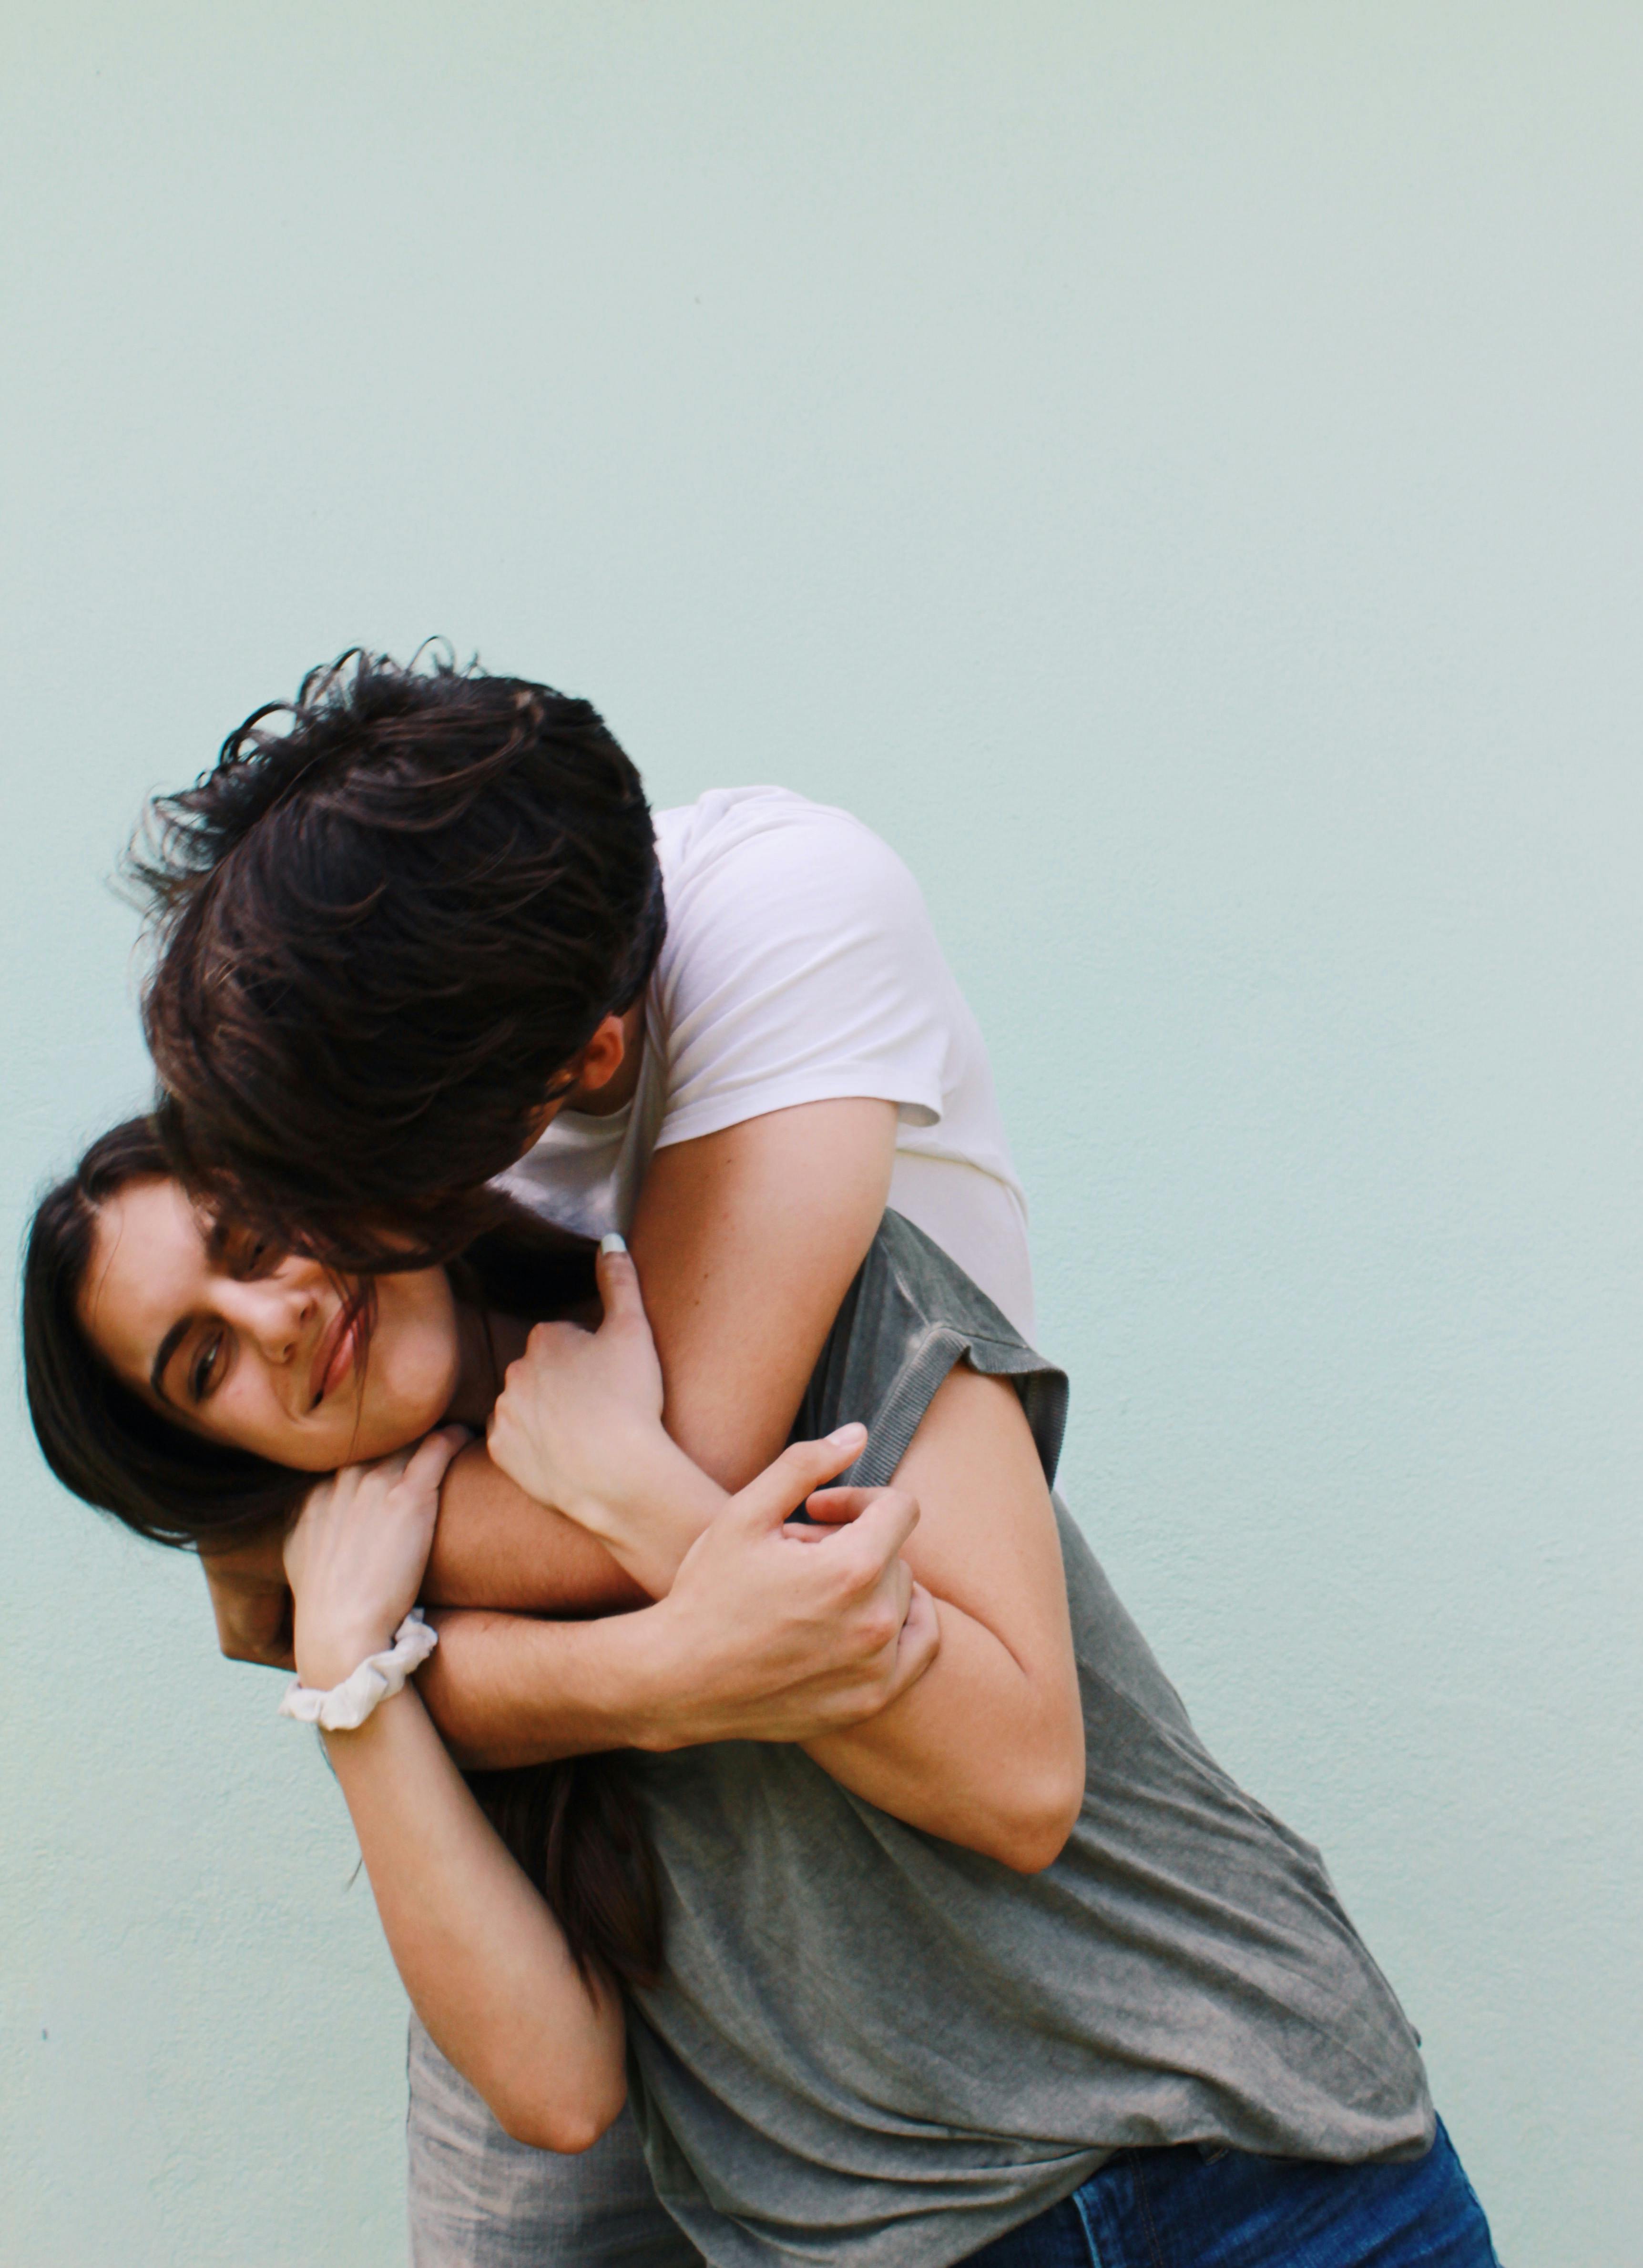 A happy man kissing and hugging a disgruntled-looking woman | Source: Pexels